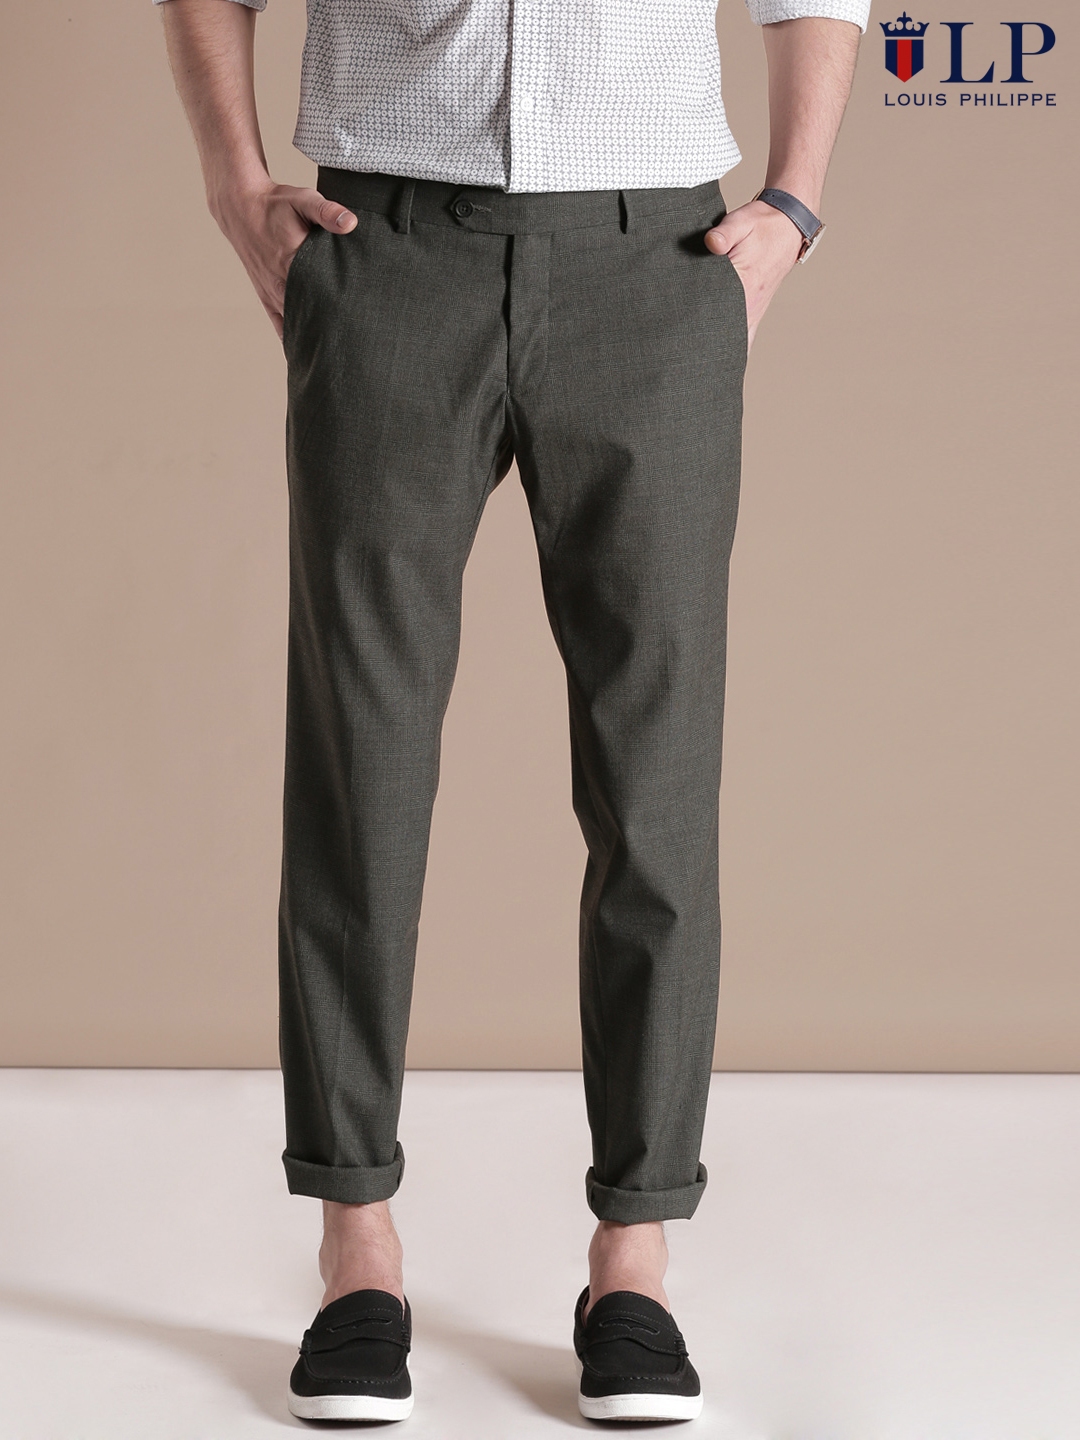 Buy Louis Philippe Blue Trousers Online  680054  Louis Philippe